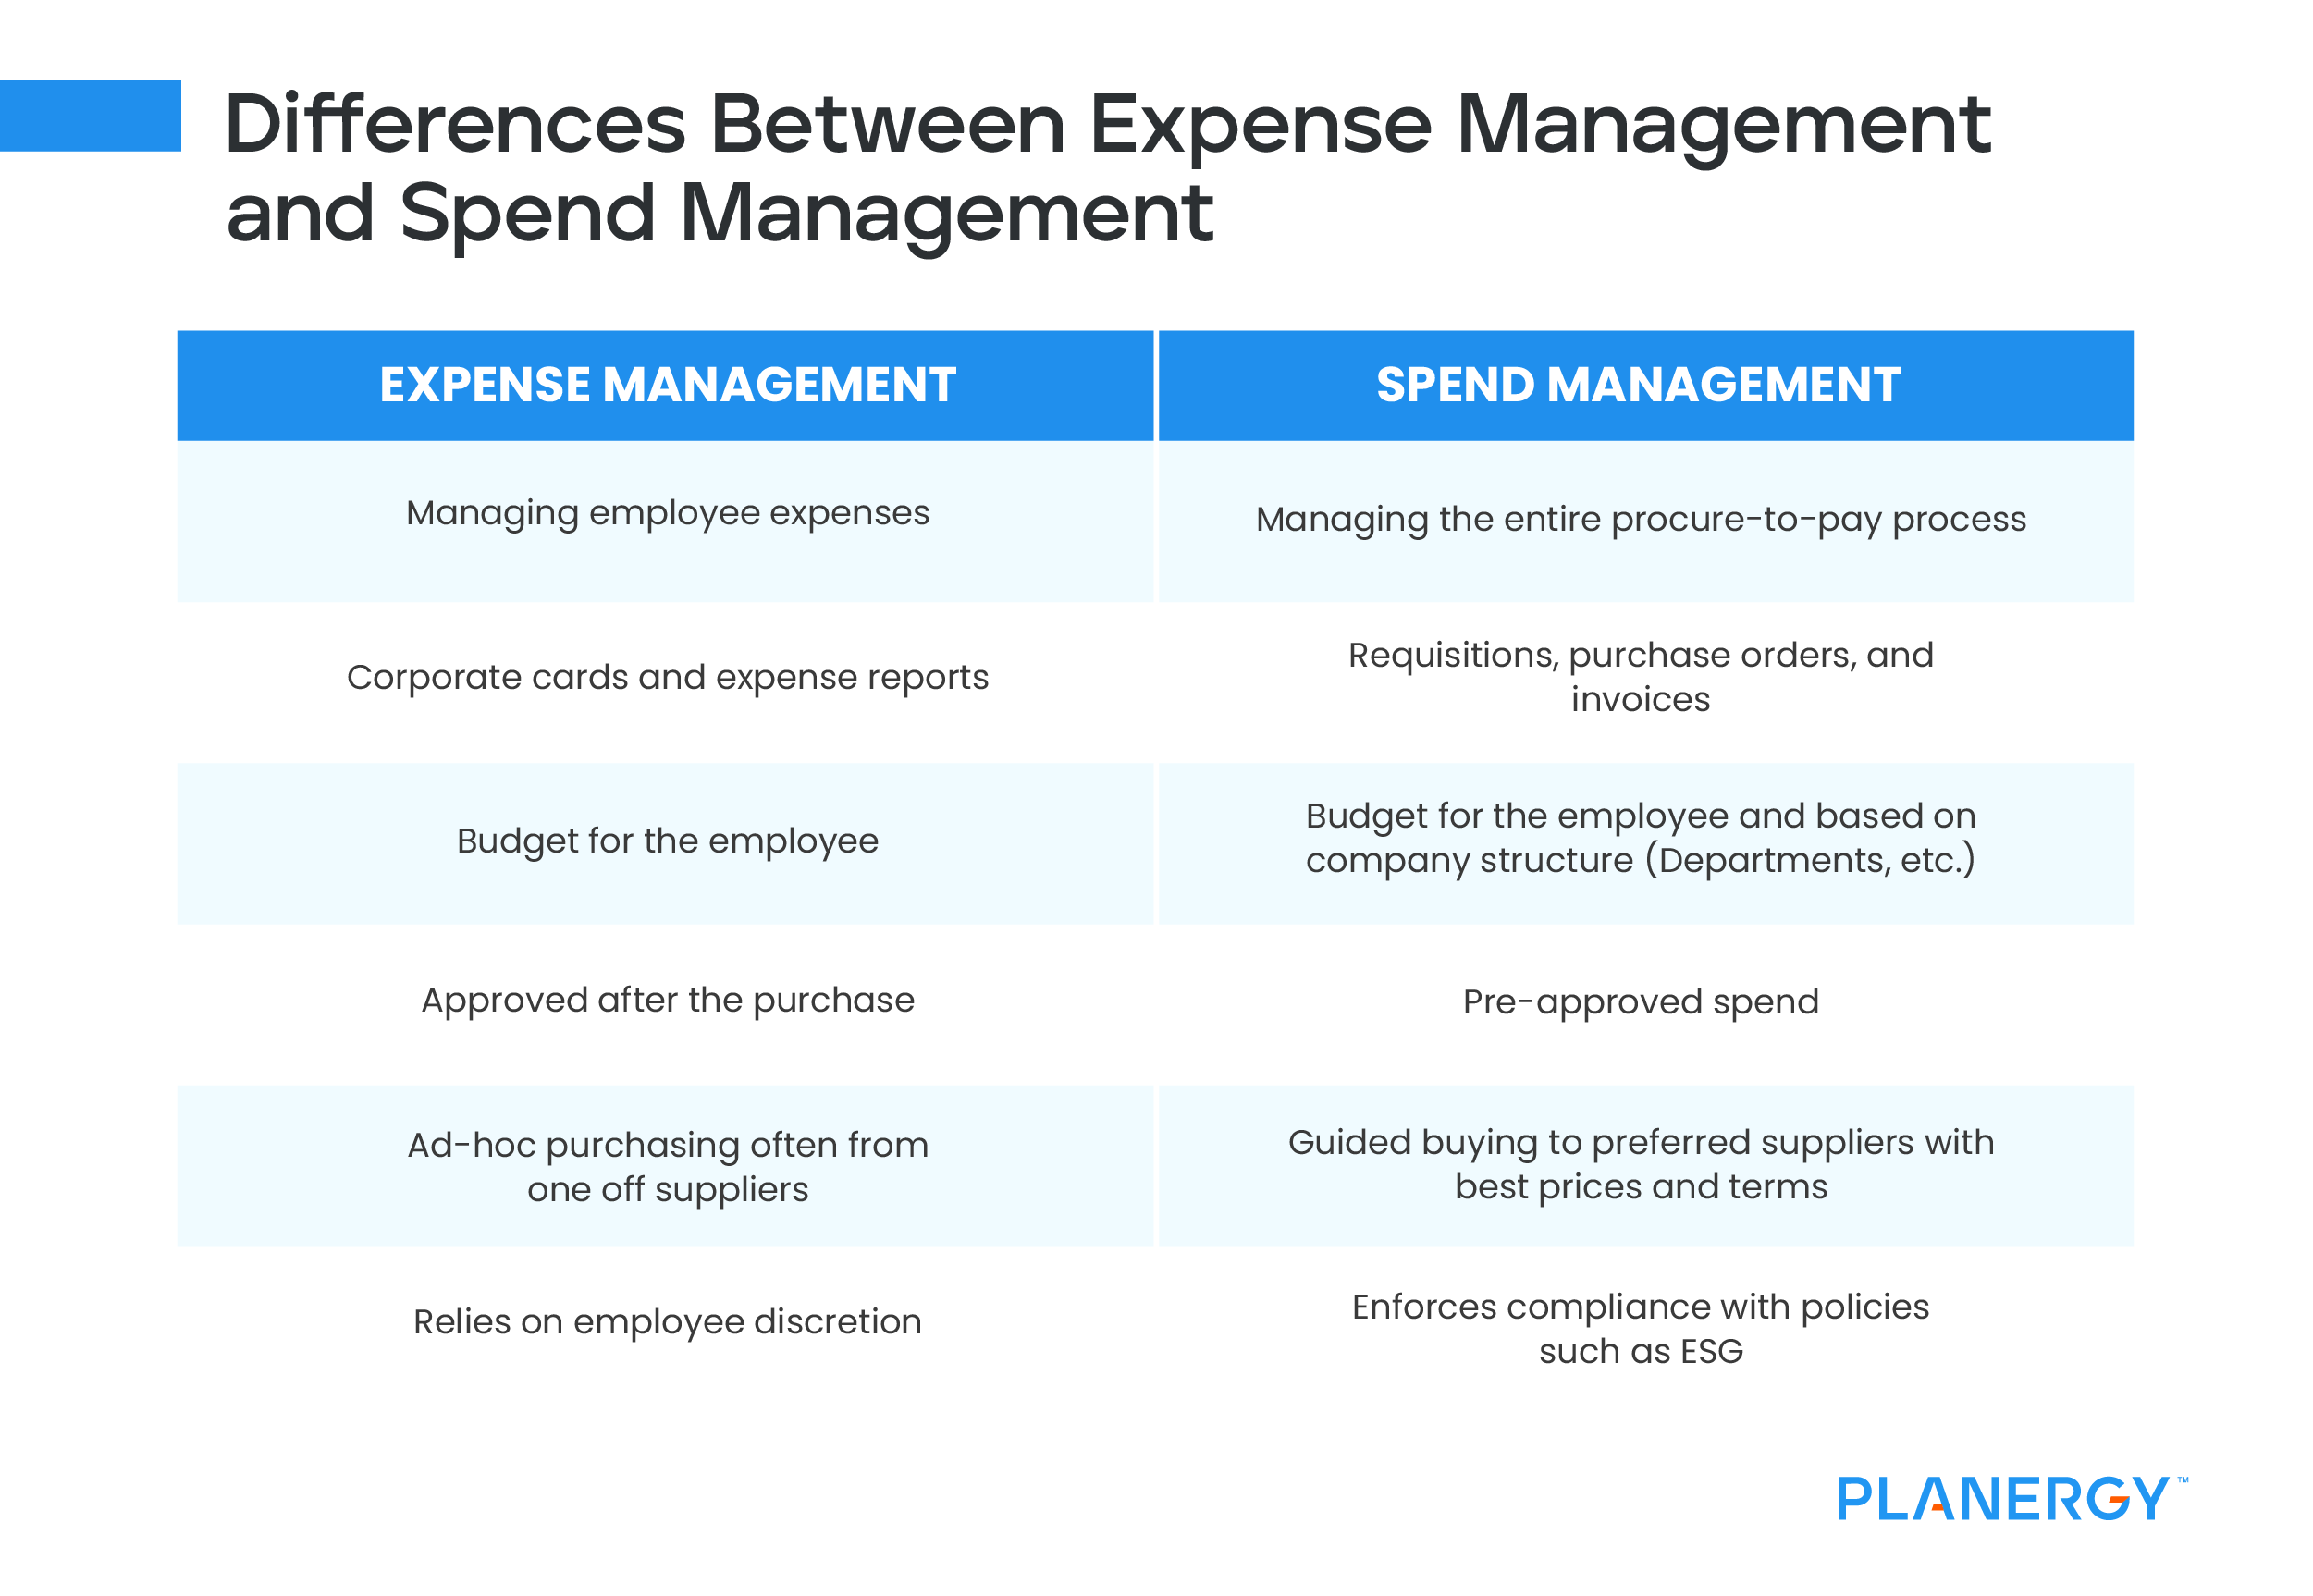 Differences Between Expense Management and Spend Management